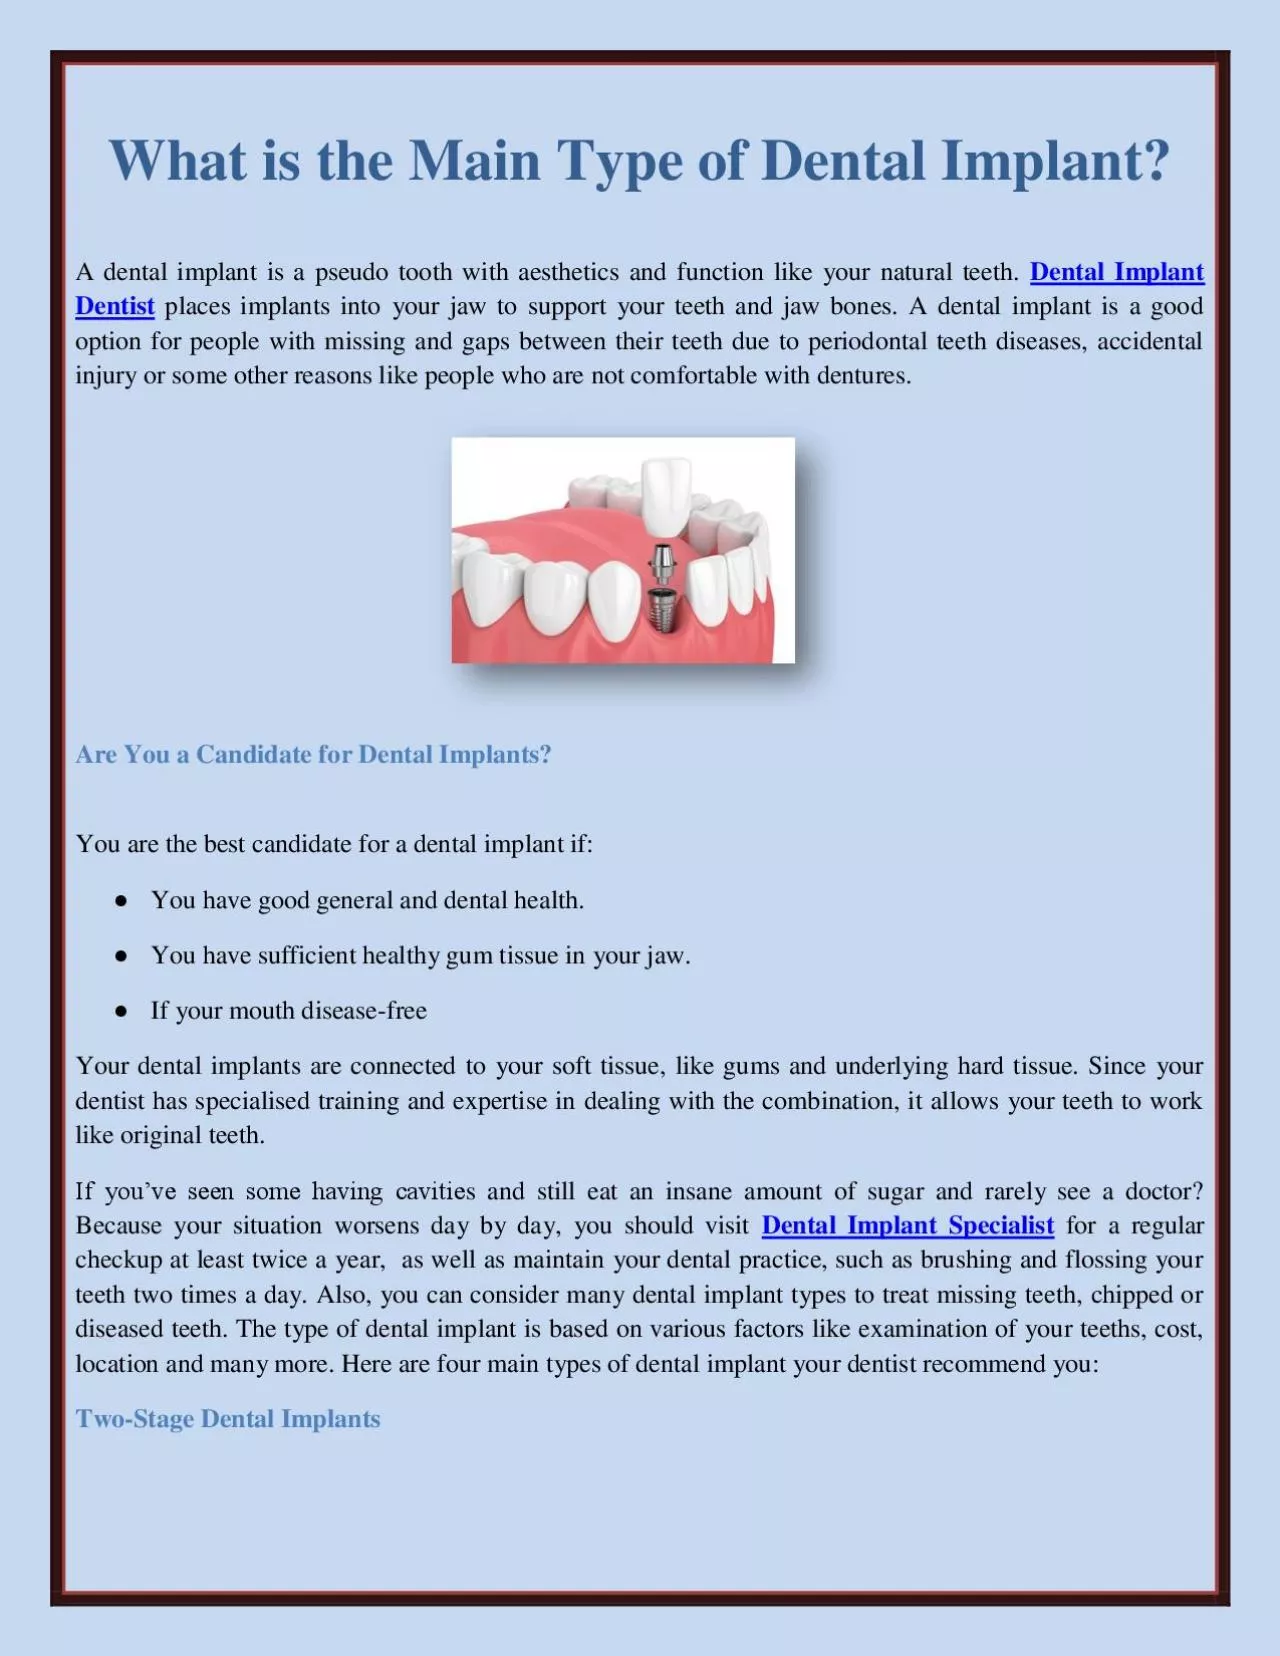 What is the Main Type of Dental Implant?